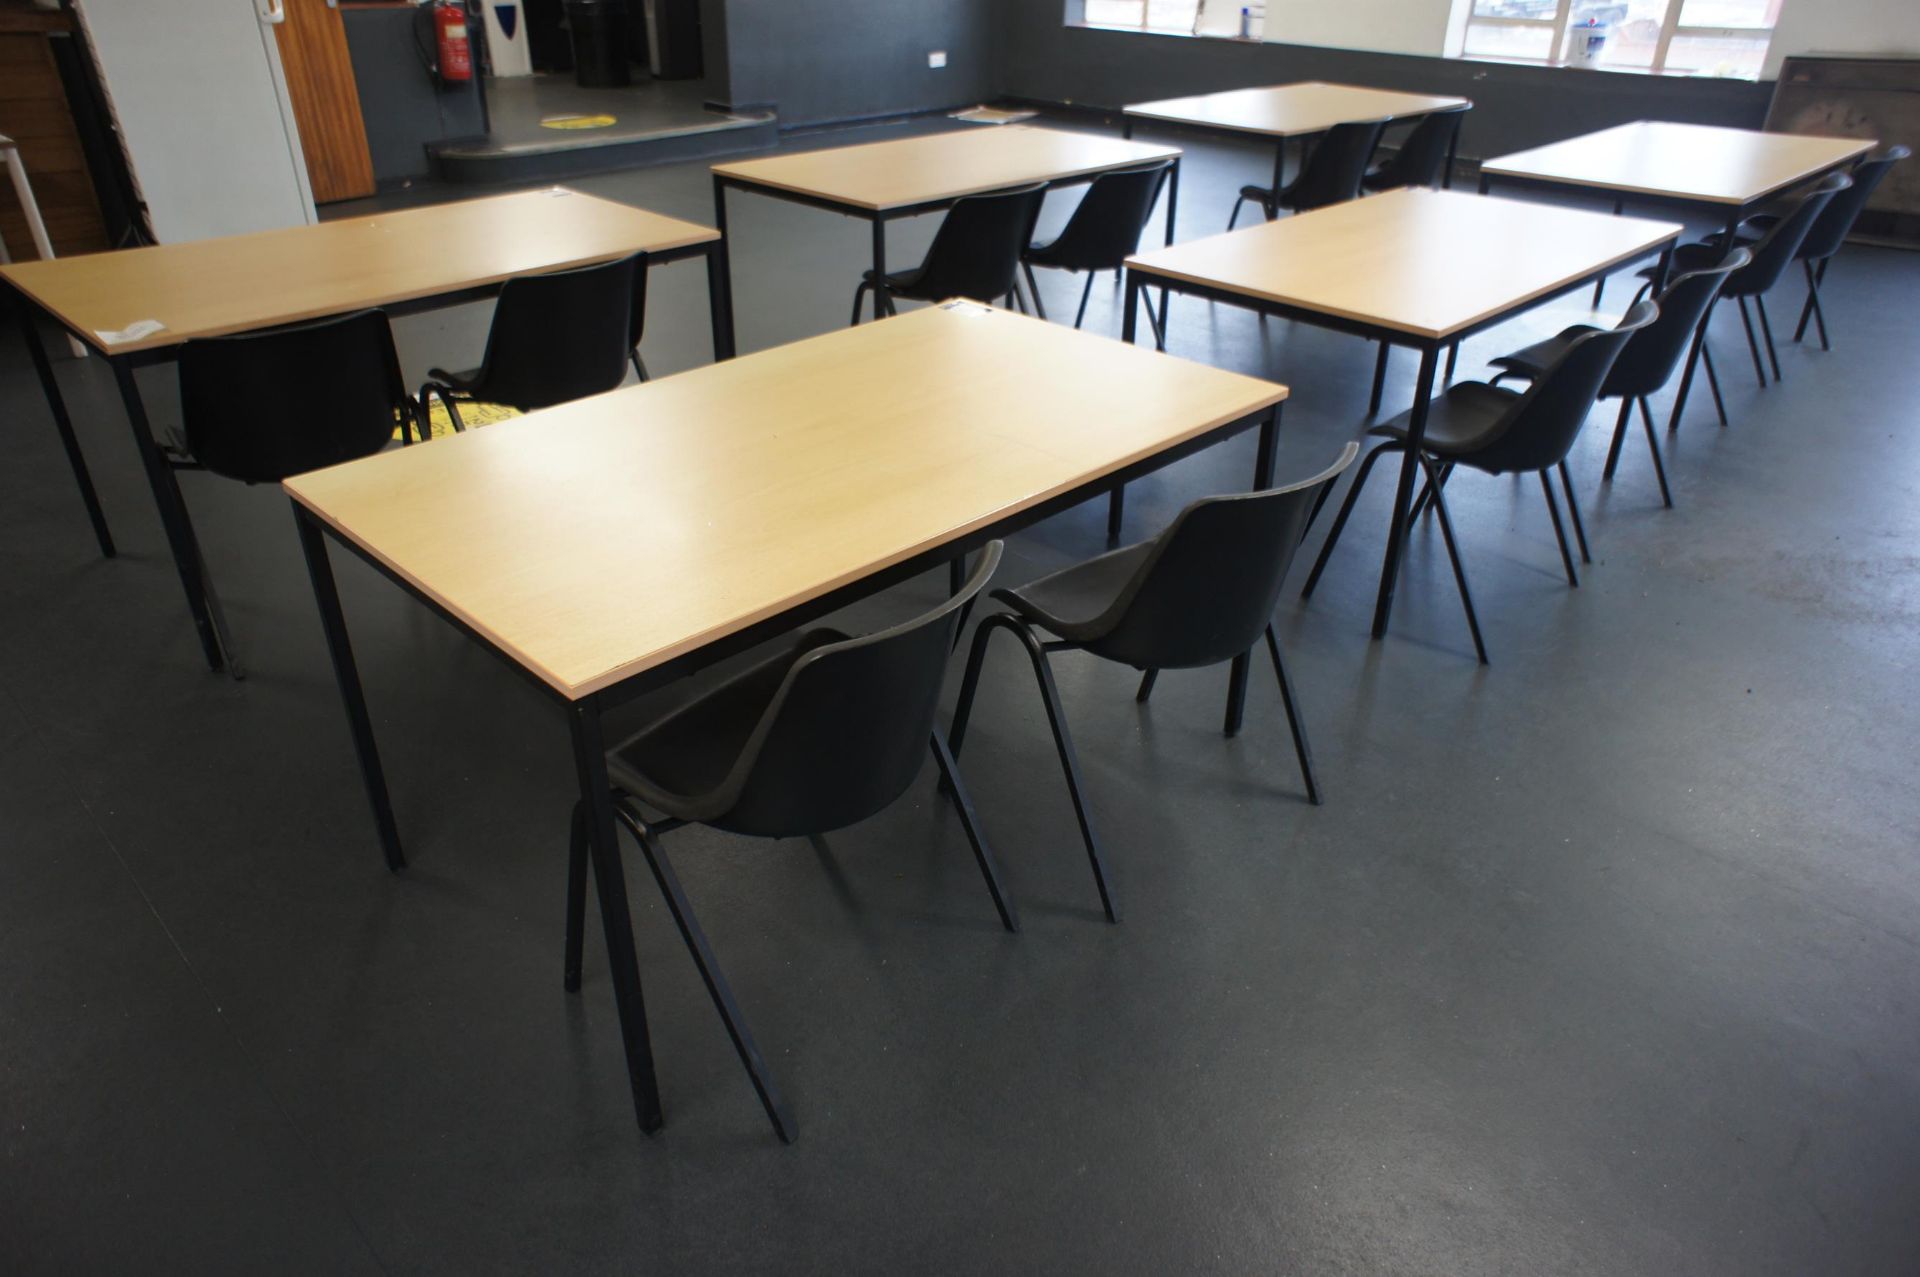 6 x Light Oak Effect Breakout Tables 1400 x 800mm with 12 Stackable Plastic Chairs - Image 3 of 3